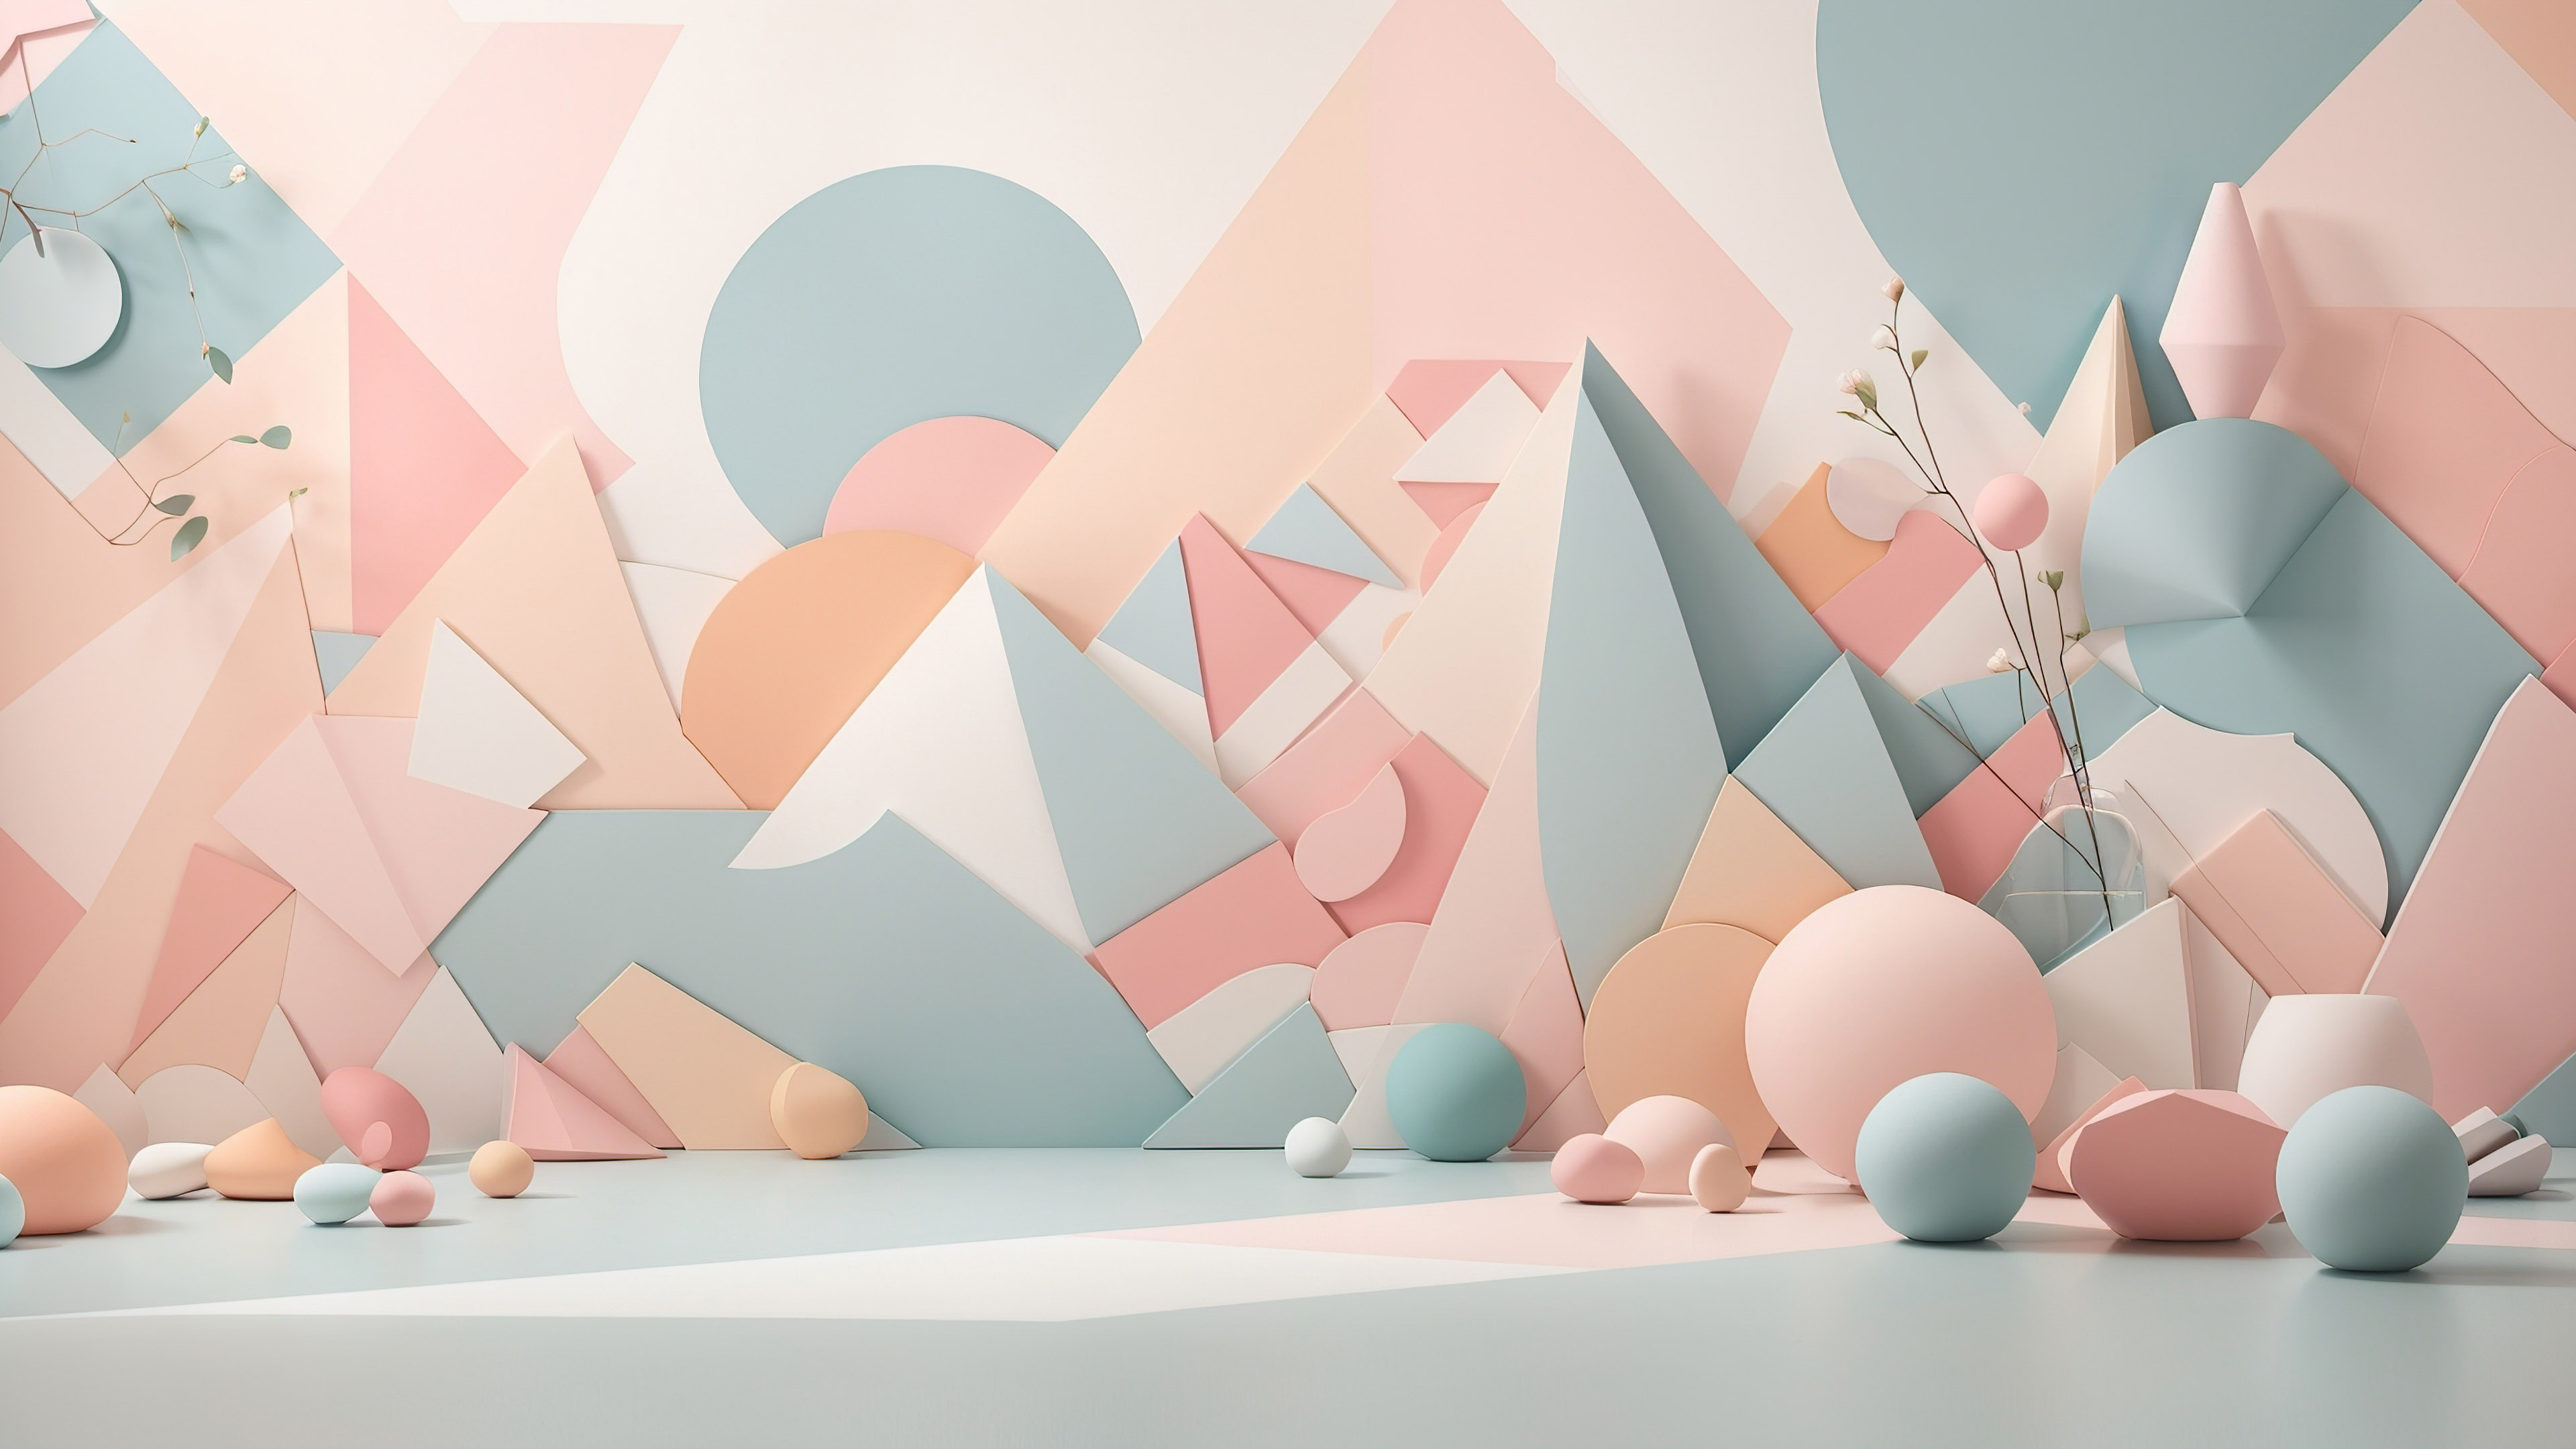 Experience a dreamy blend of soft pastel shades and geometric shapes with a 3D abstract wallpaper.